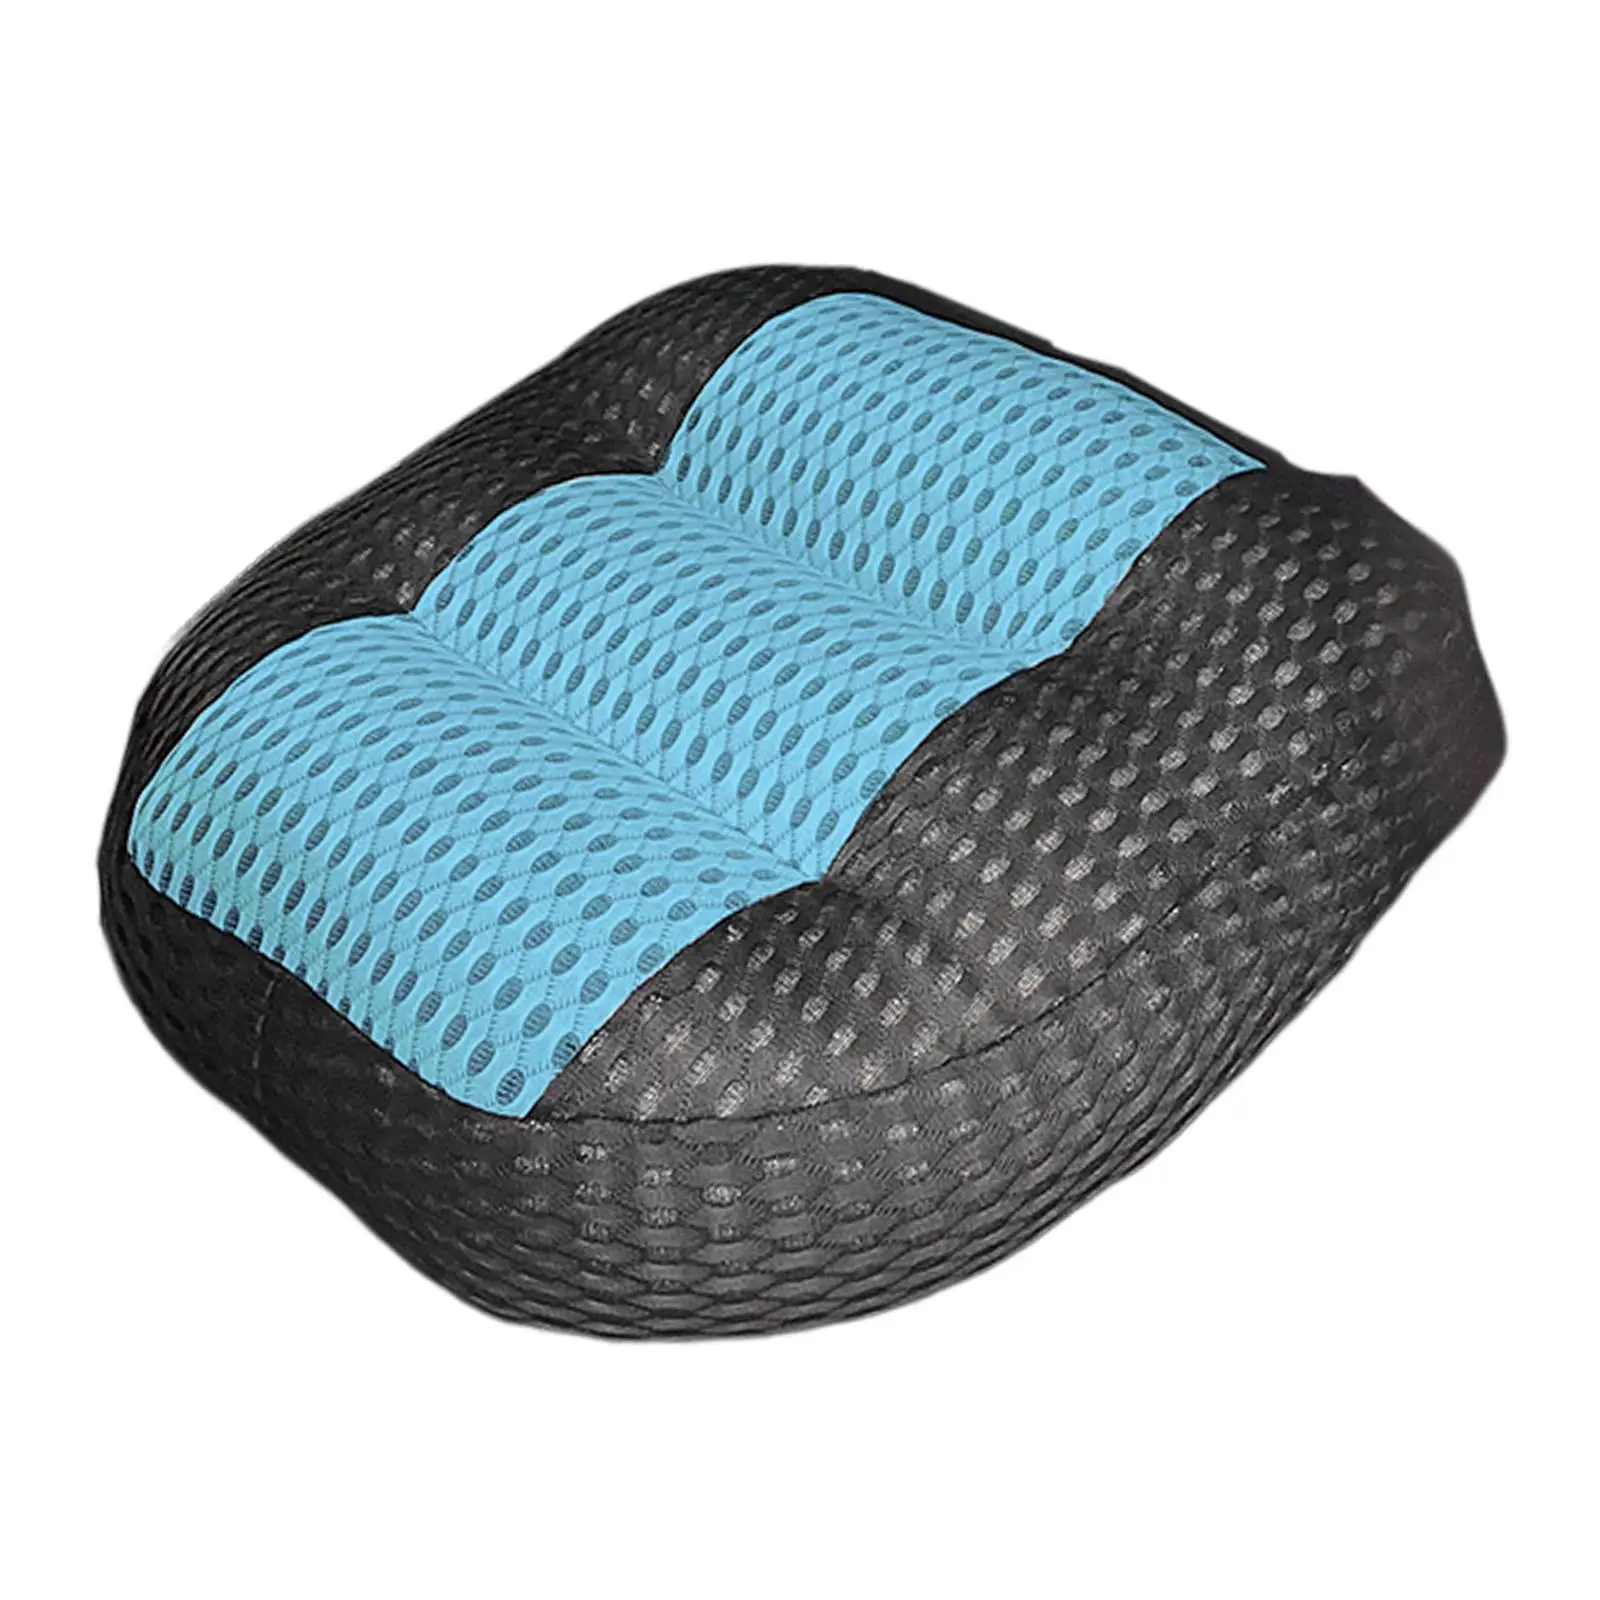 Car Booster Seat Cushion Automotive Seat Cushion Pad for Short Drivers People Wheelchairs Adult Truck Cars SUV Home Office Chair